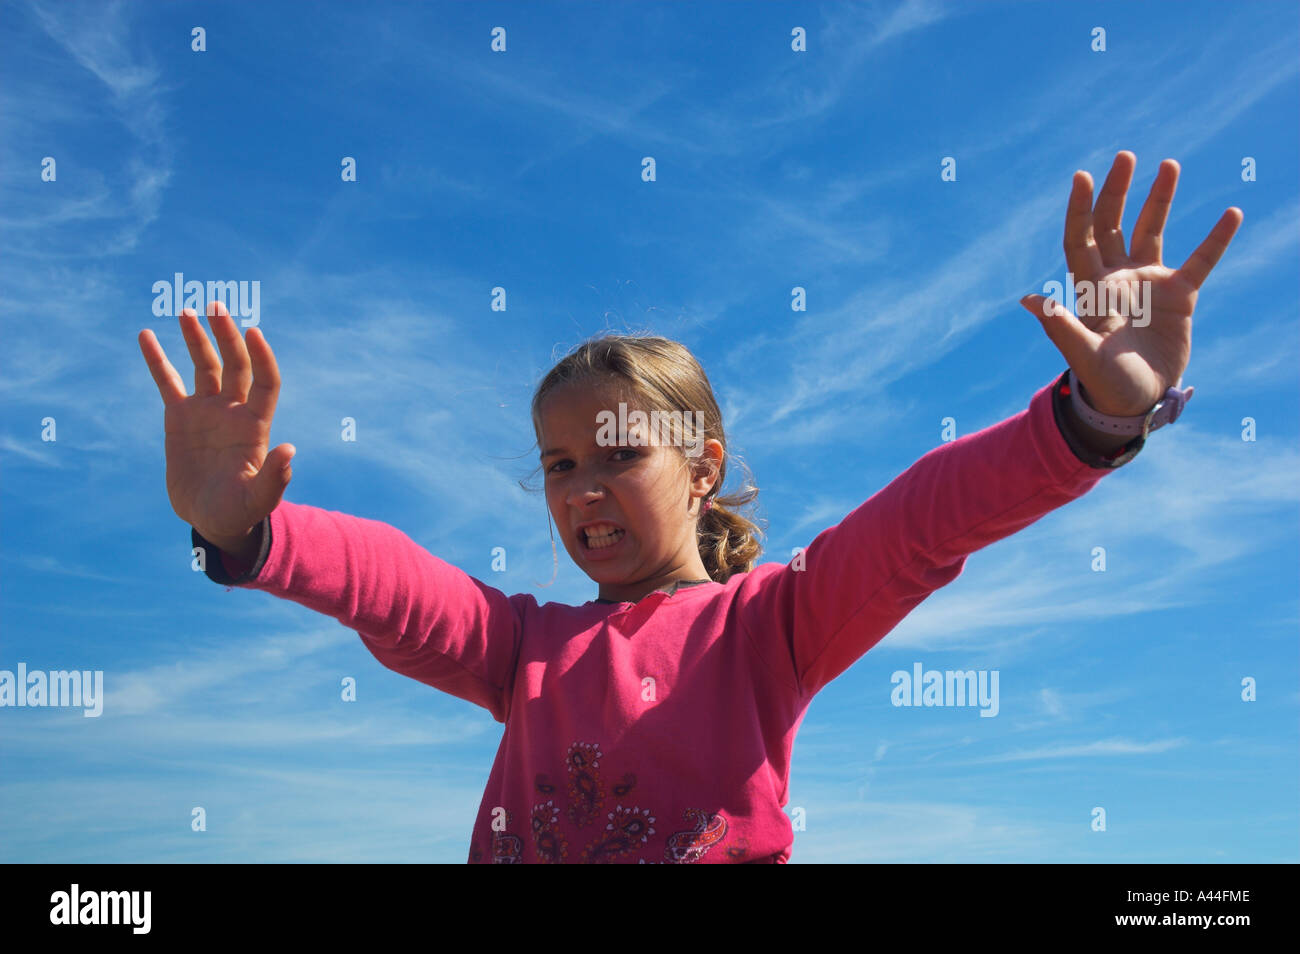 girl child with zonky expression big sky behind arms akimbo Stock Photo